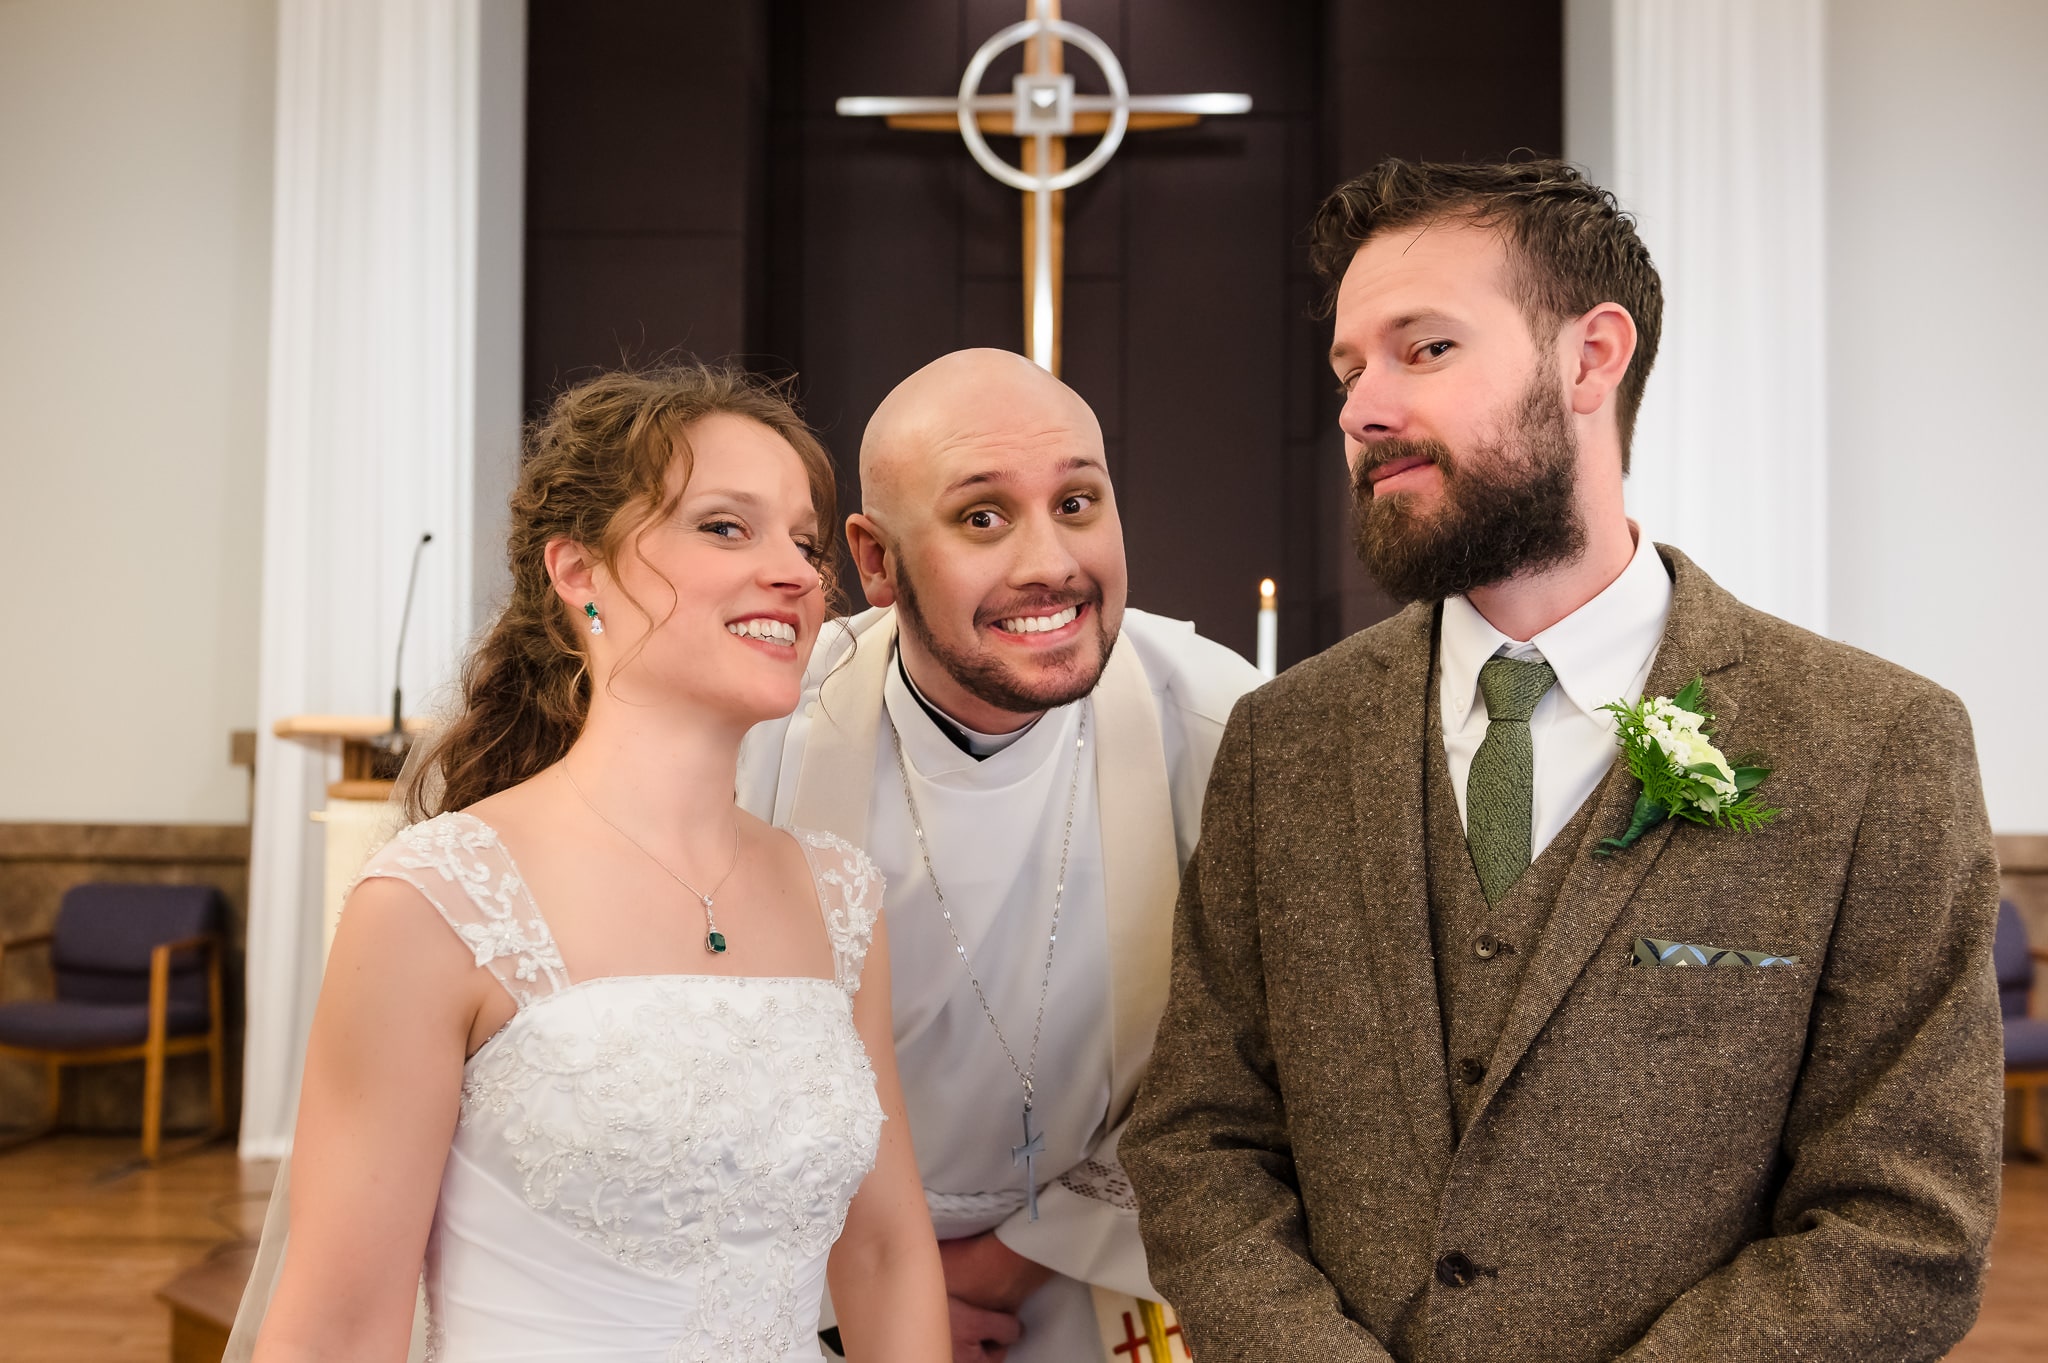 The brother of the groom and acting officiant make faces as he stands between the couple.